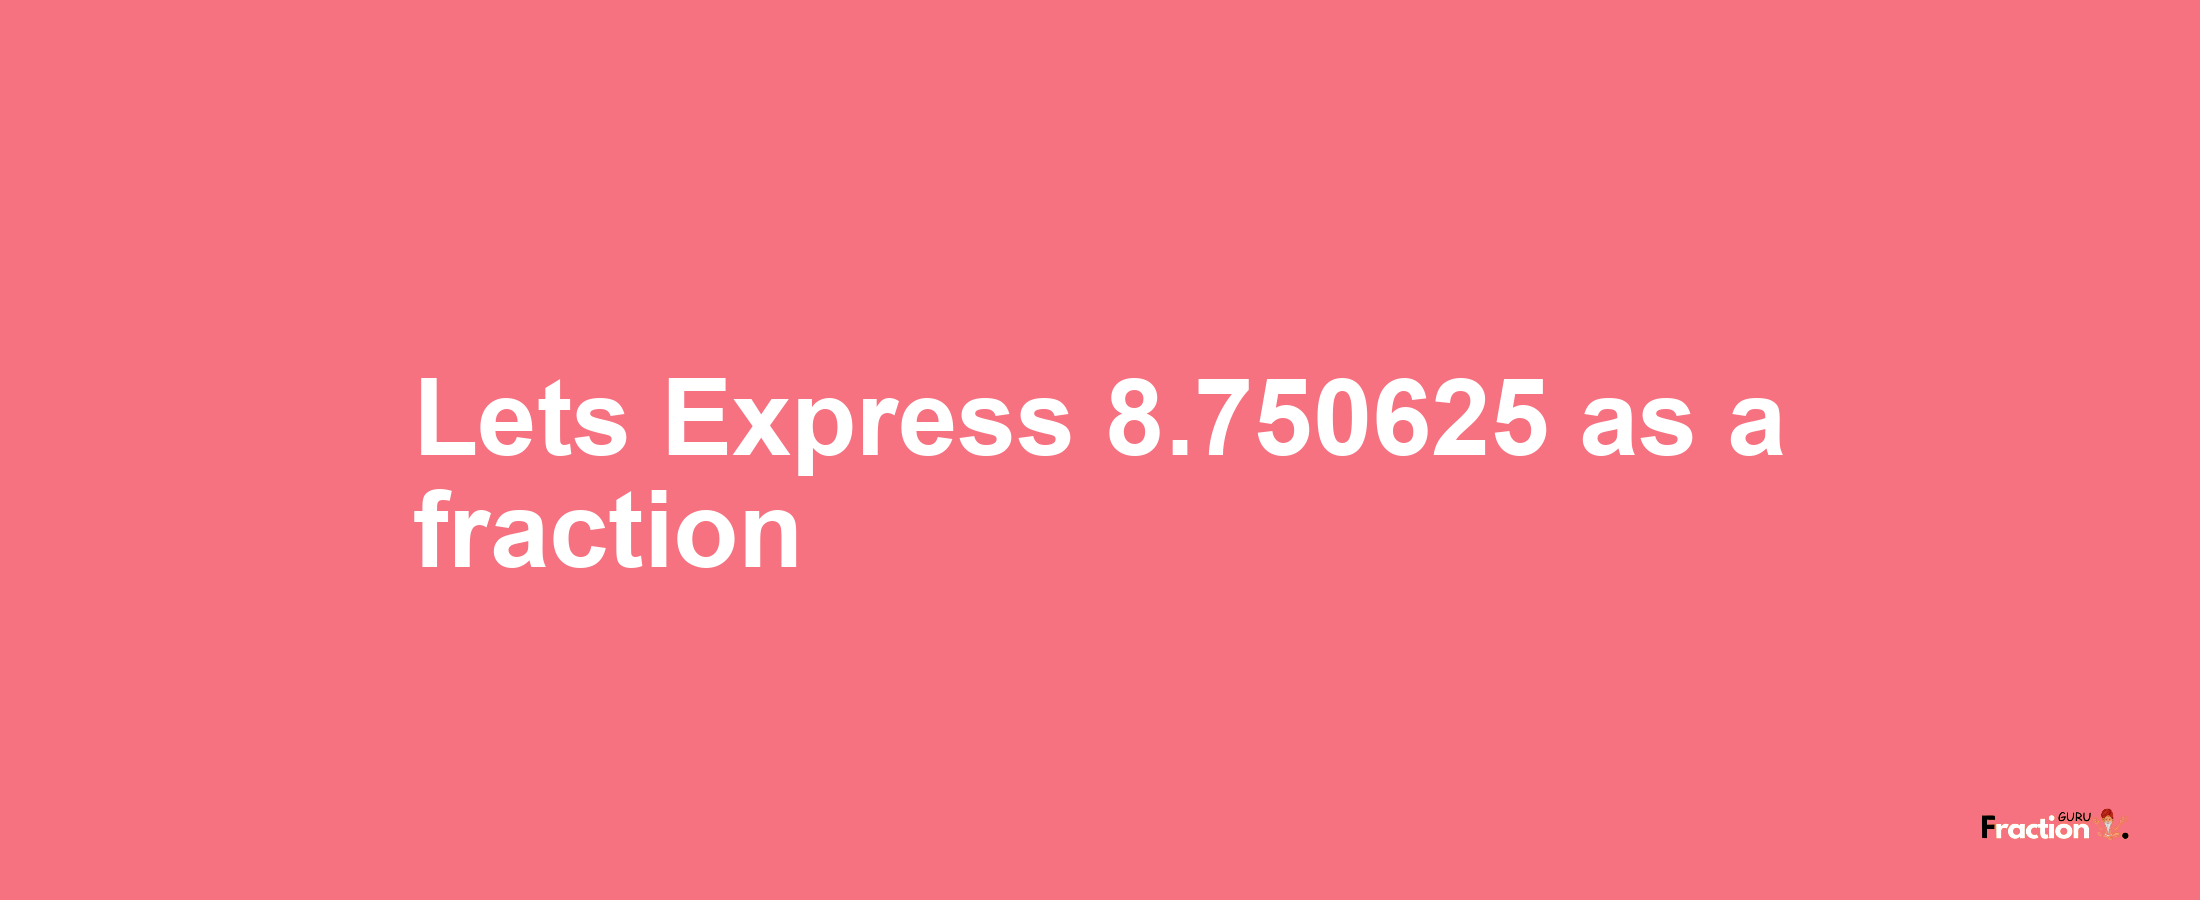 Lets Express 8.750625 as afraction